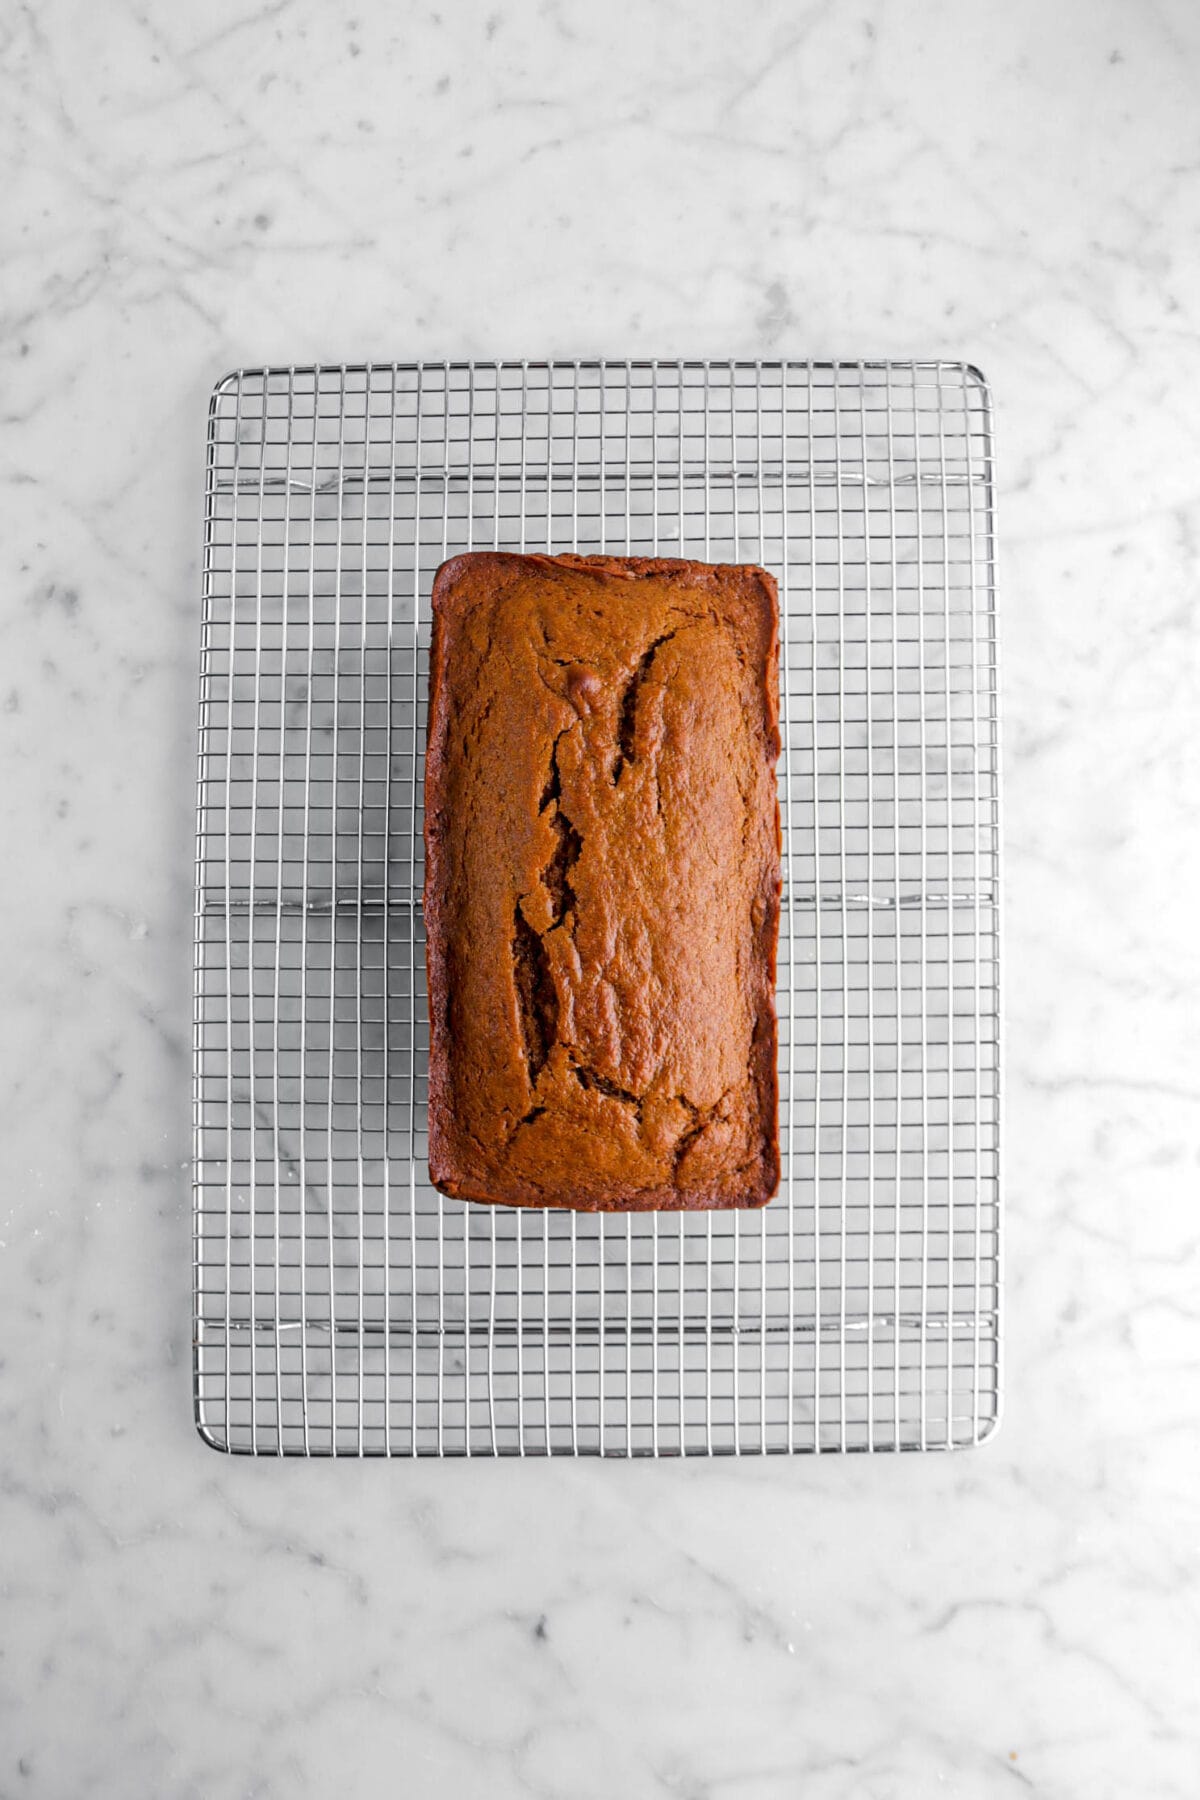 baked gingerbread loaf cake on wire cooling rack.